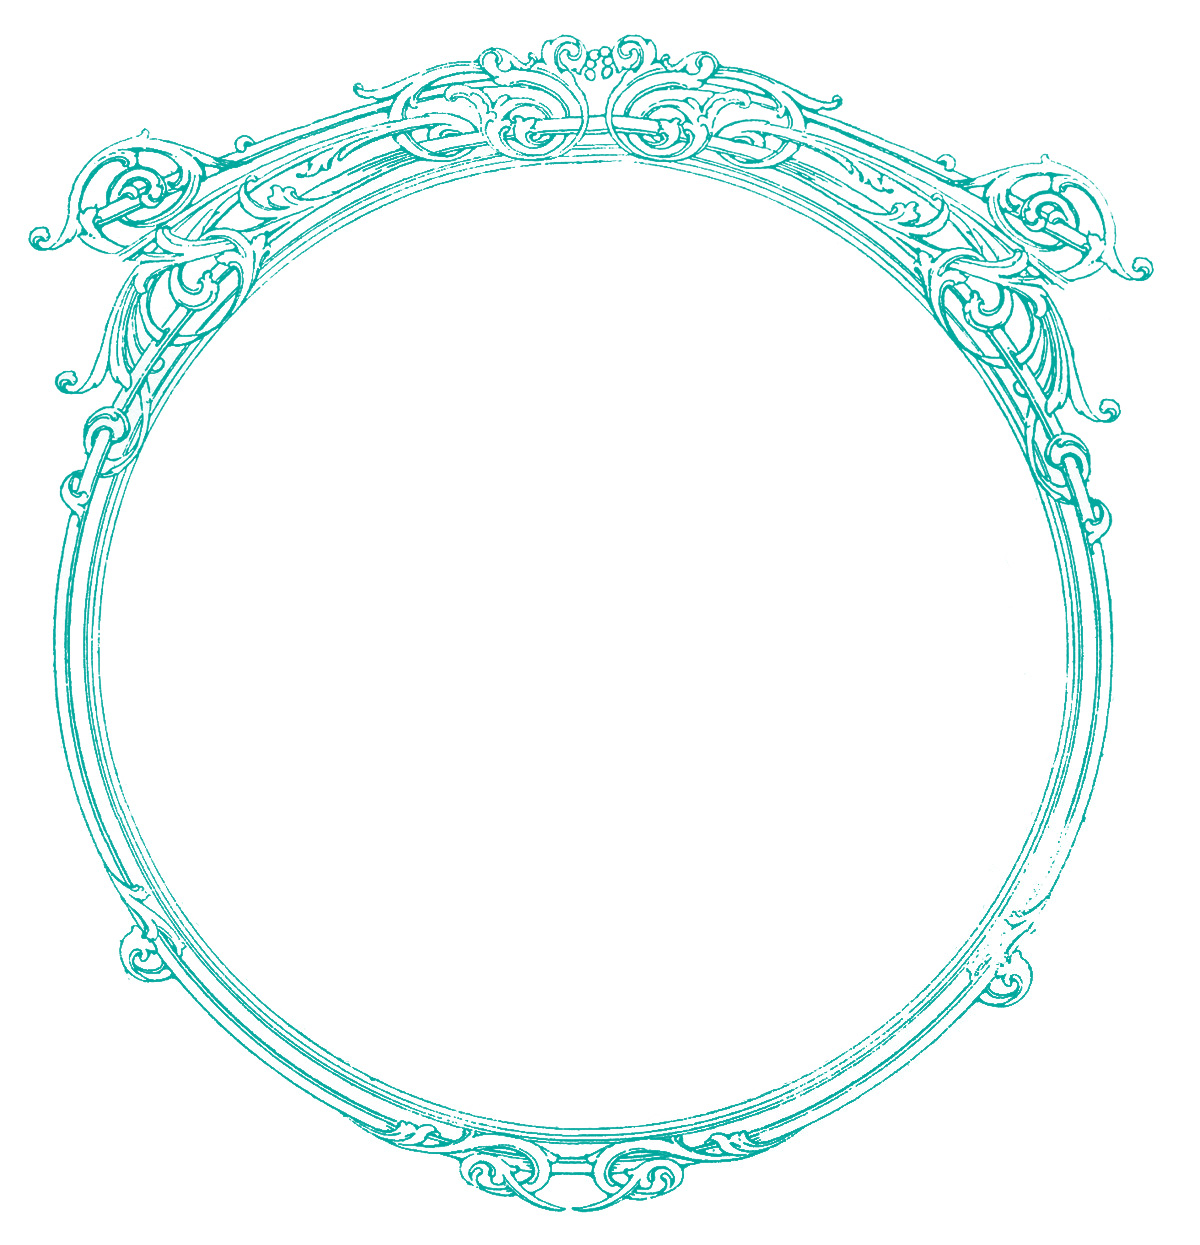 Vintage Images - Round Ornate Frames - The Graphics Fairy